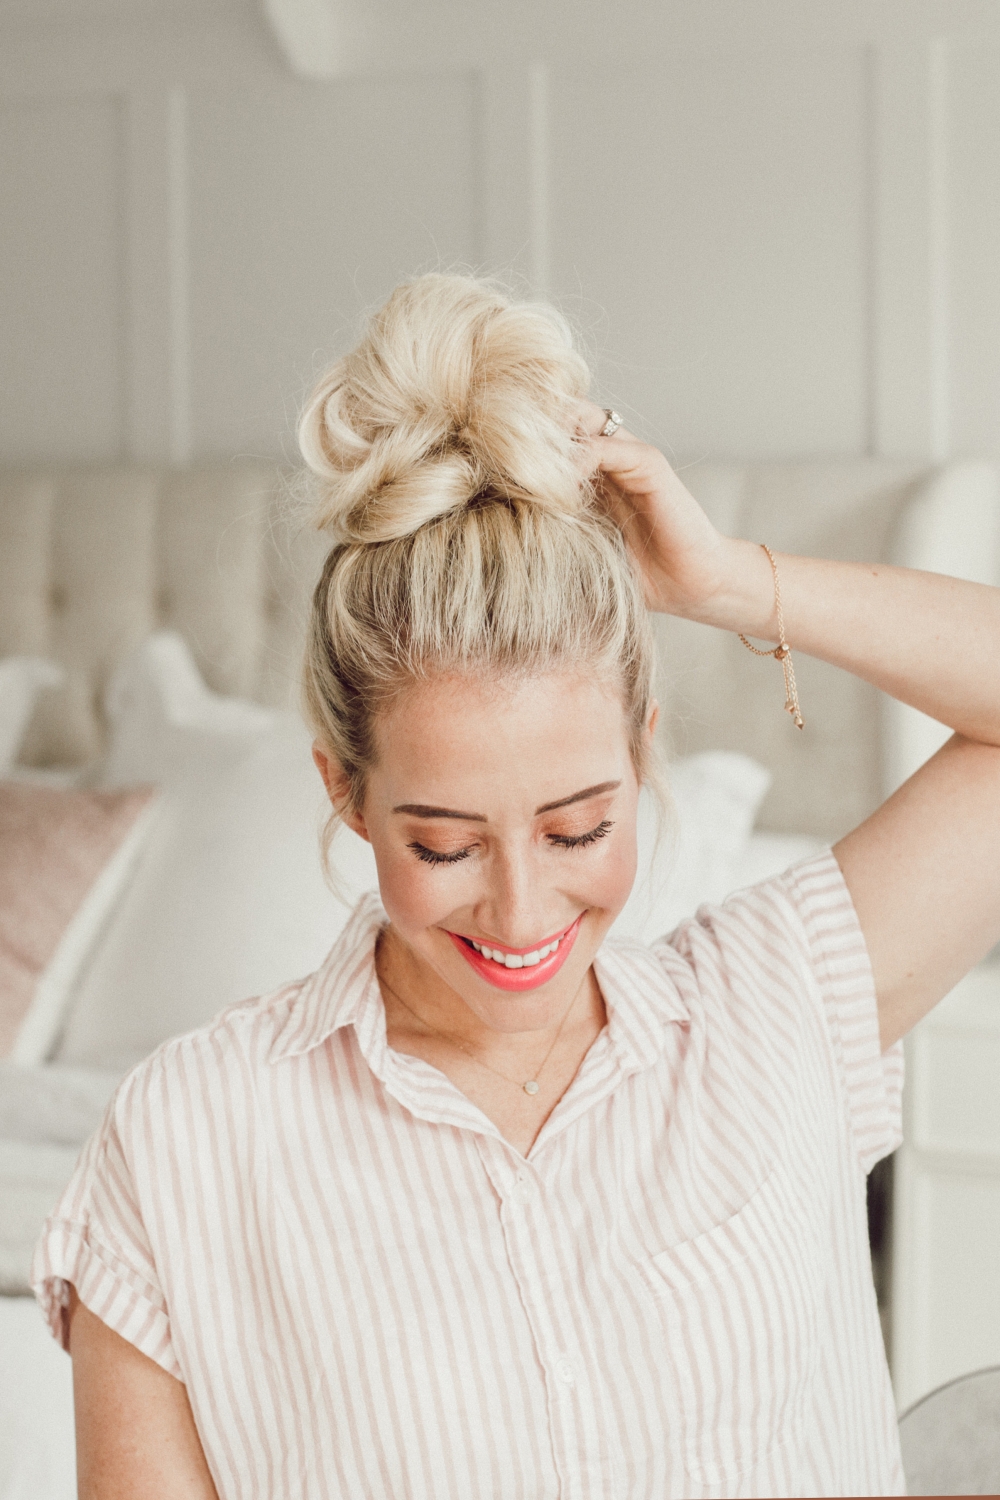 Here are 5 ways to wear the messy bun- perfect for back to school from Twistmepretty.com